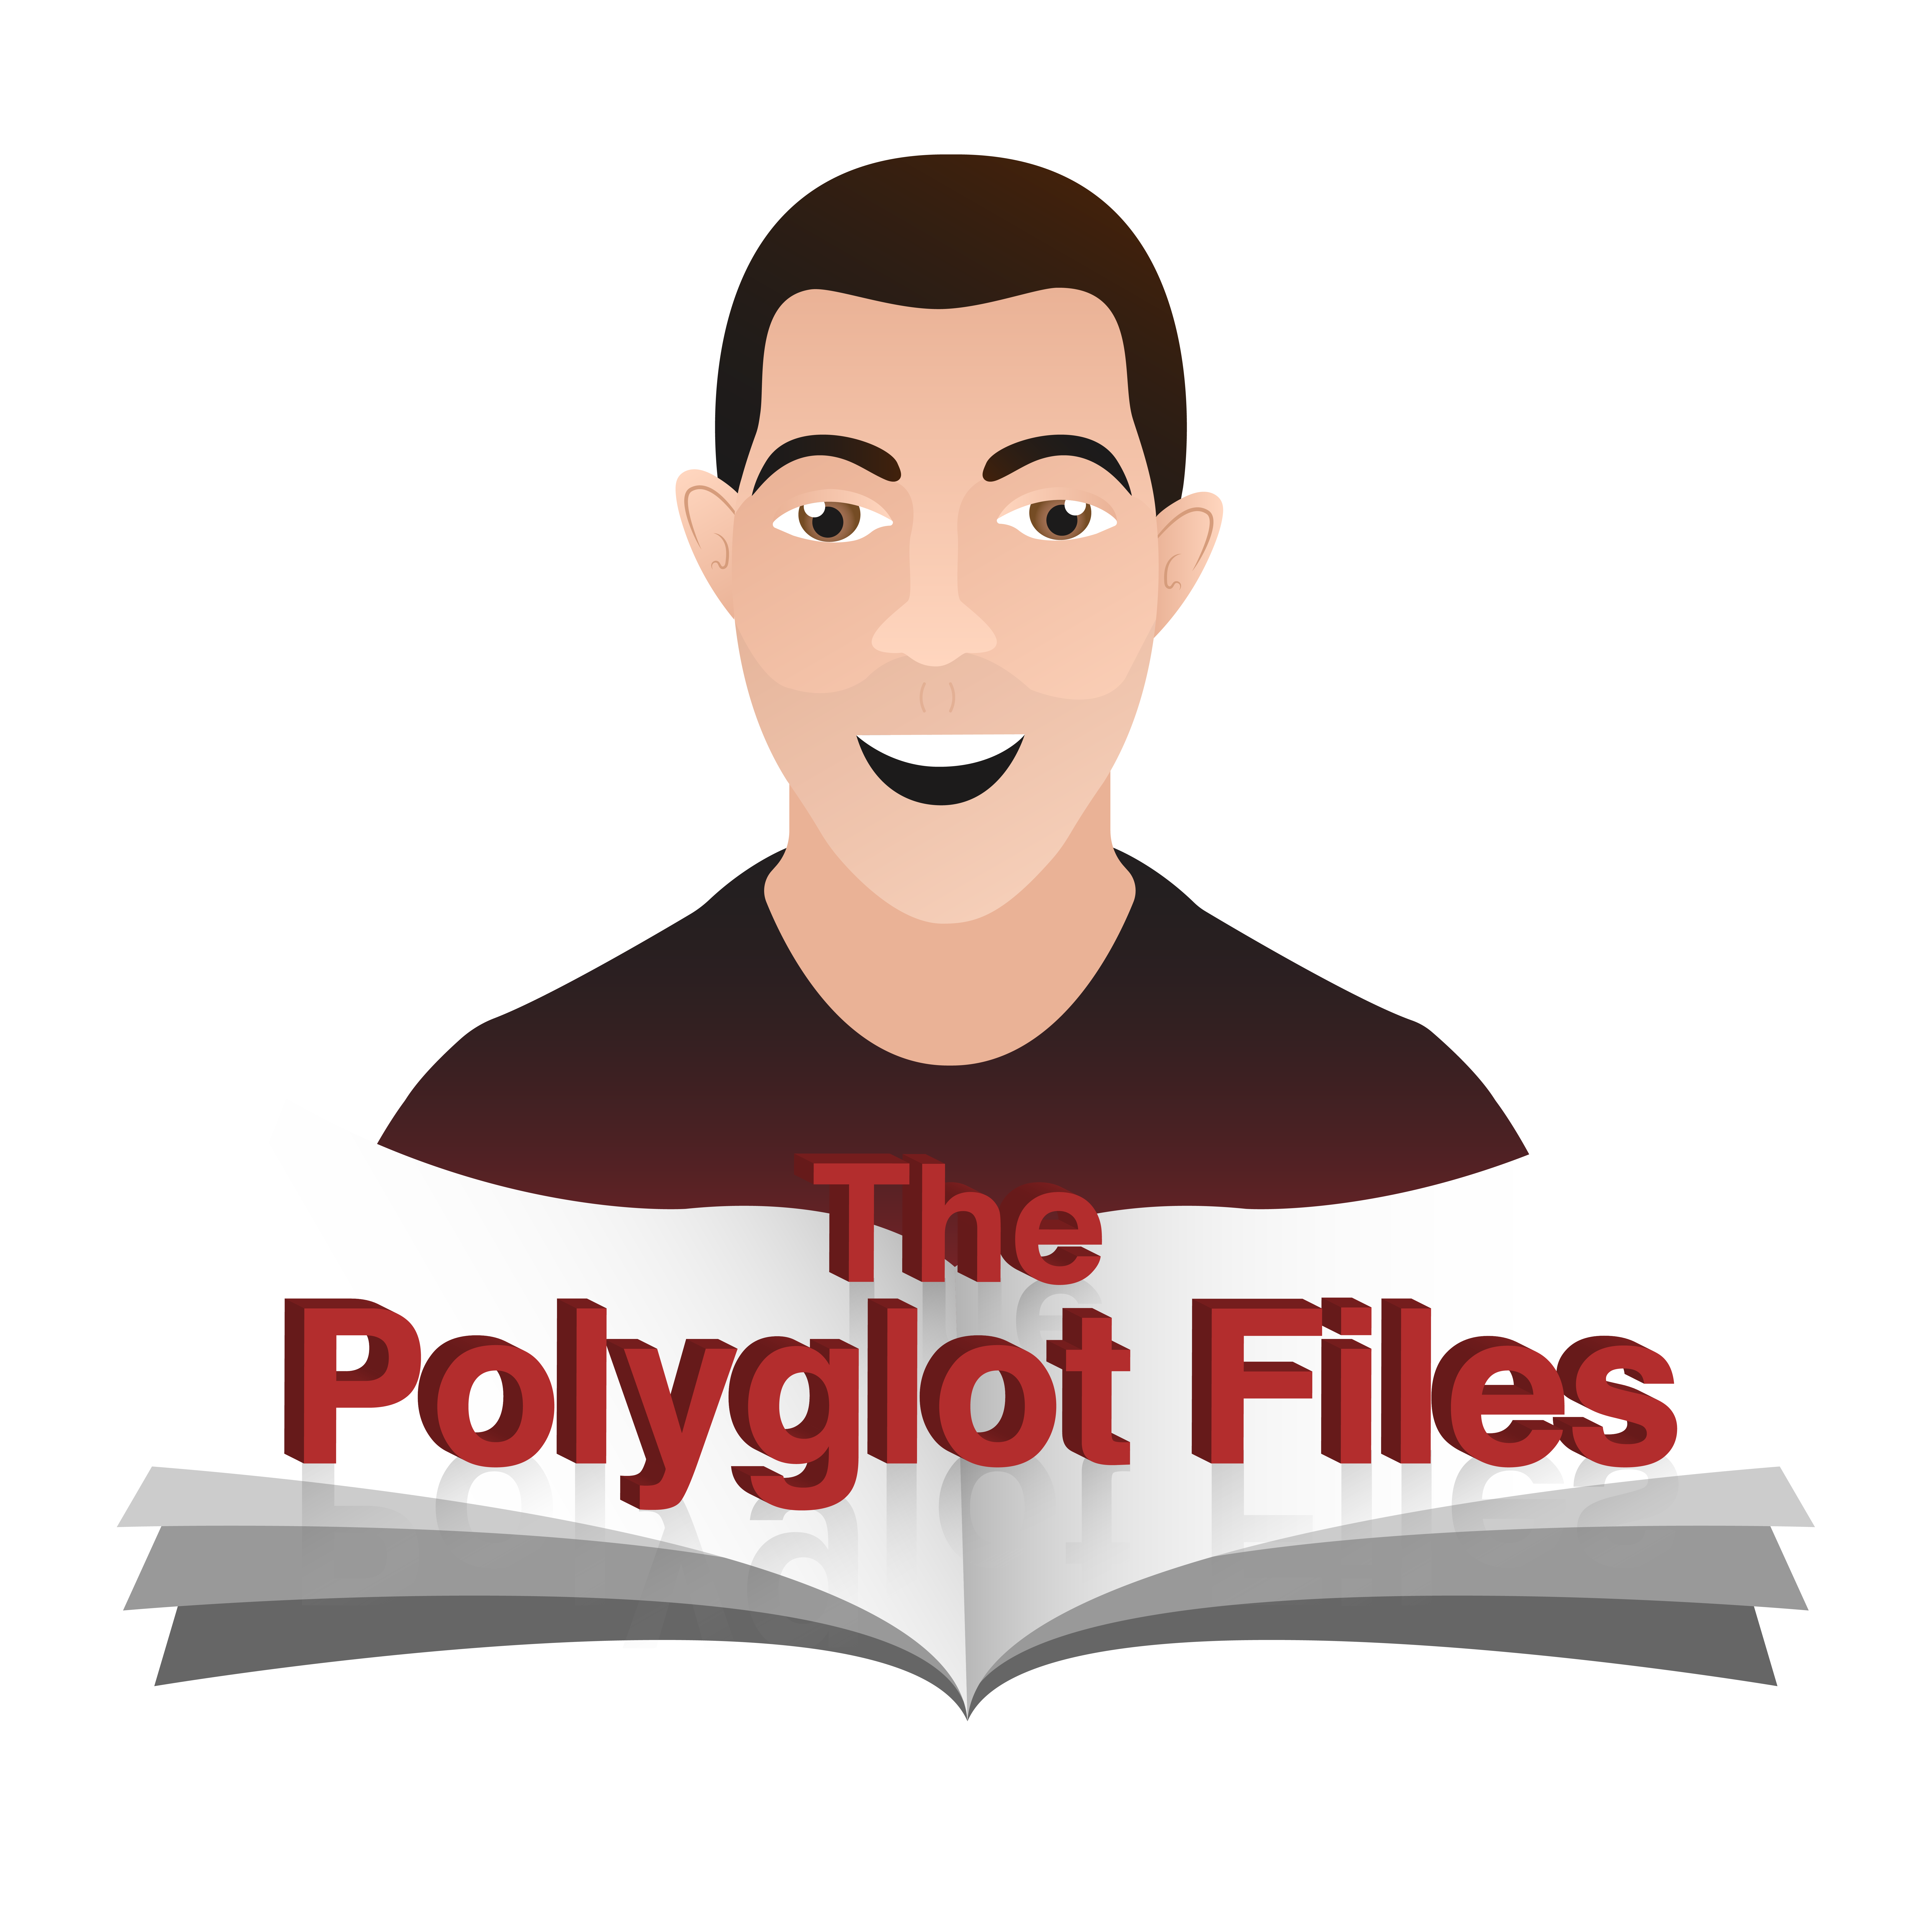 The Polyglot Files